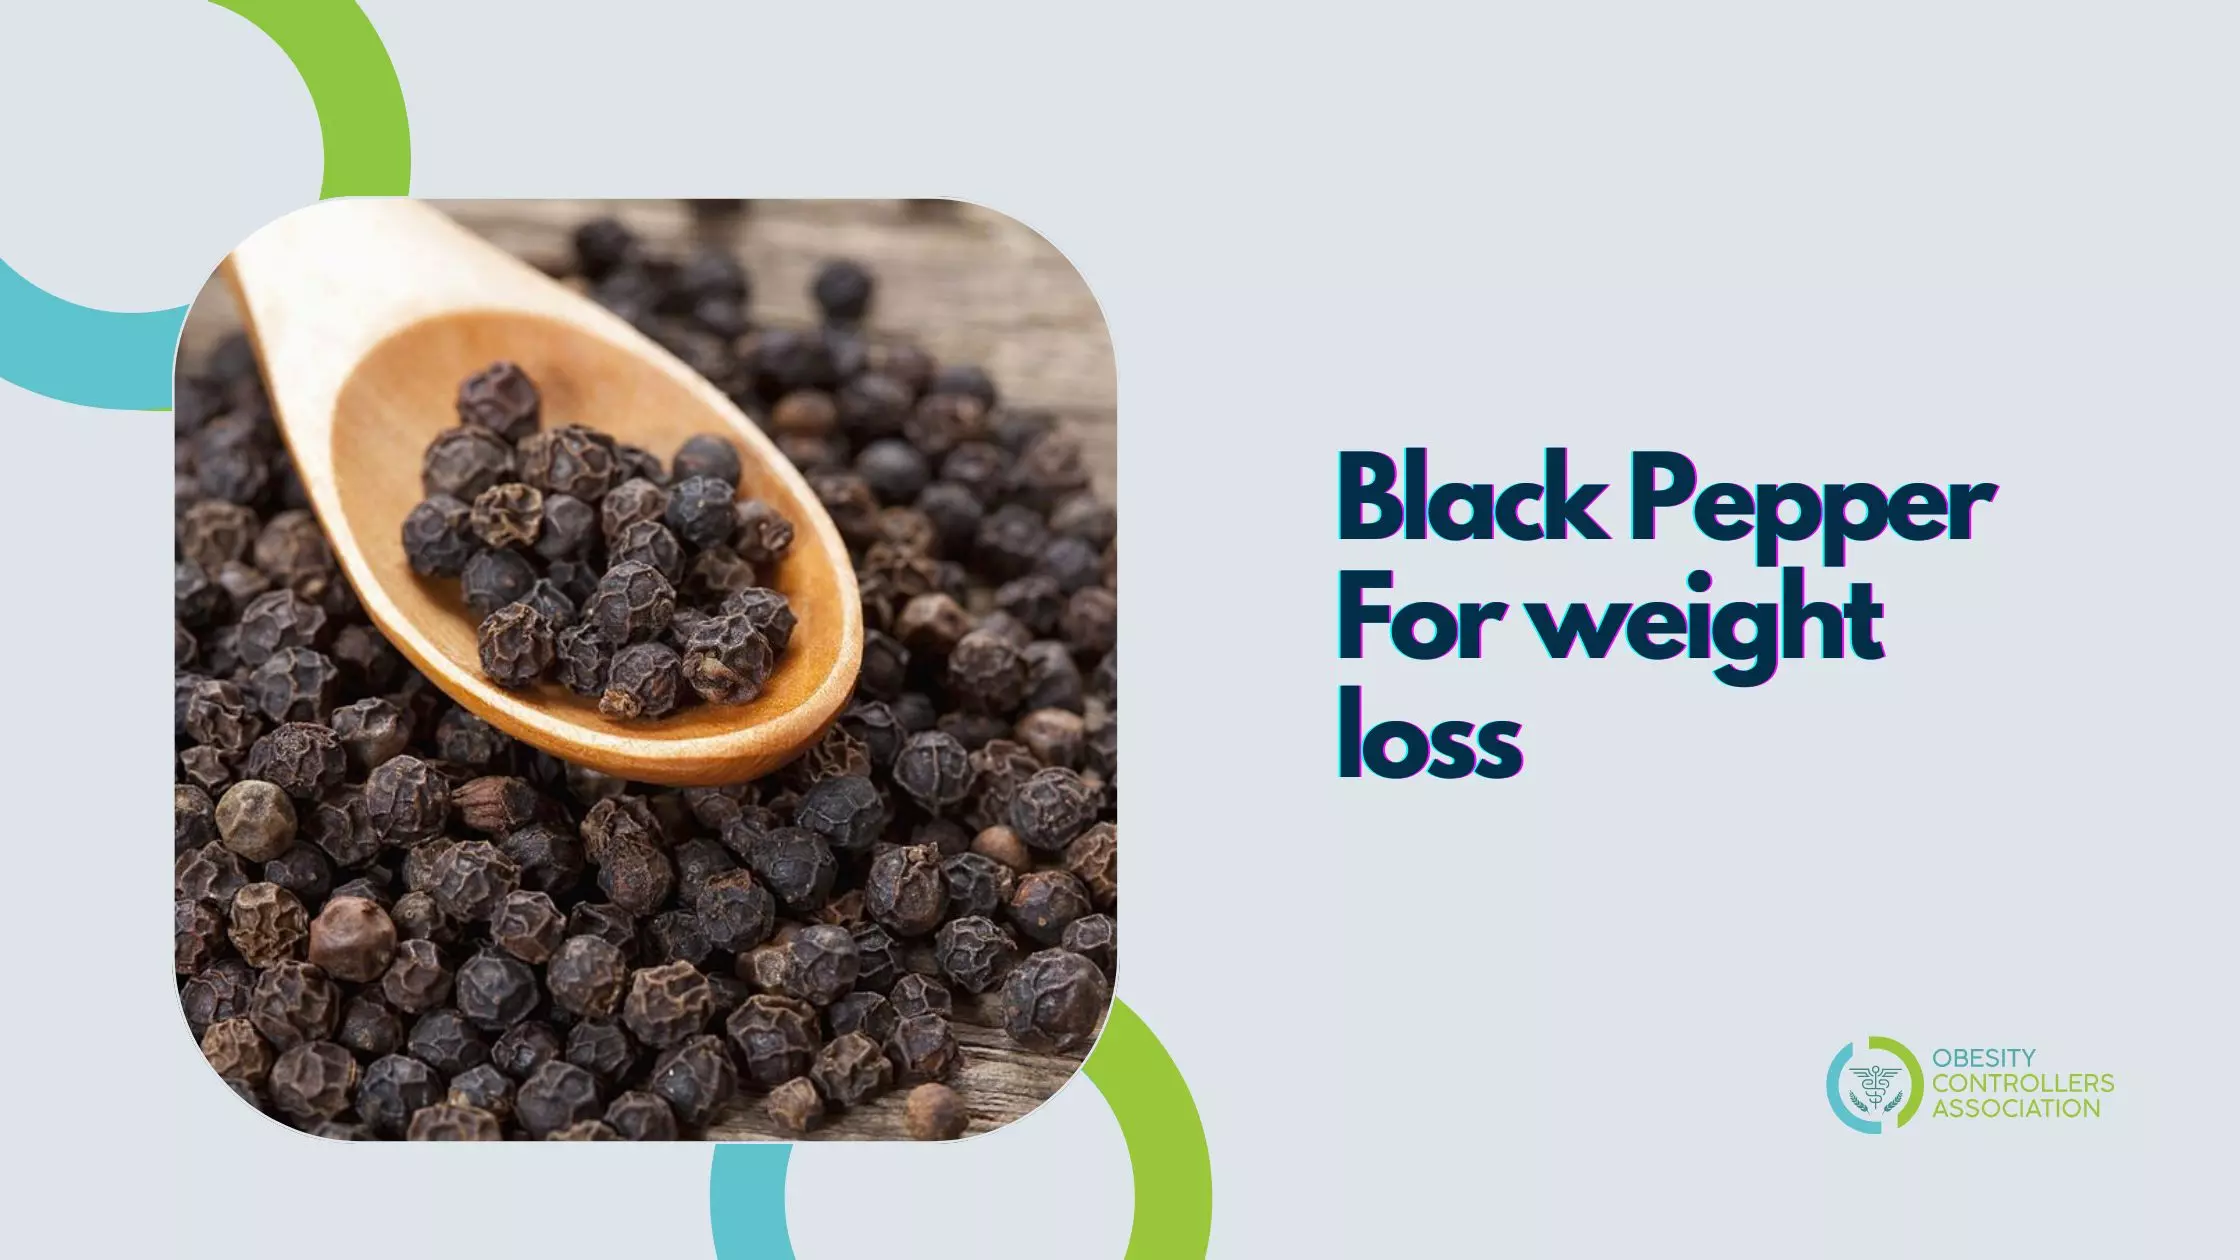 Black Pepper For weight loss